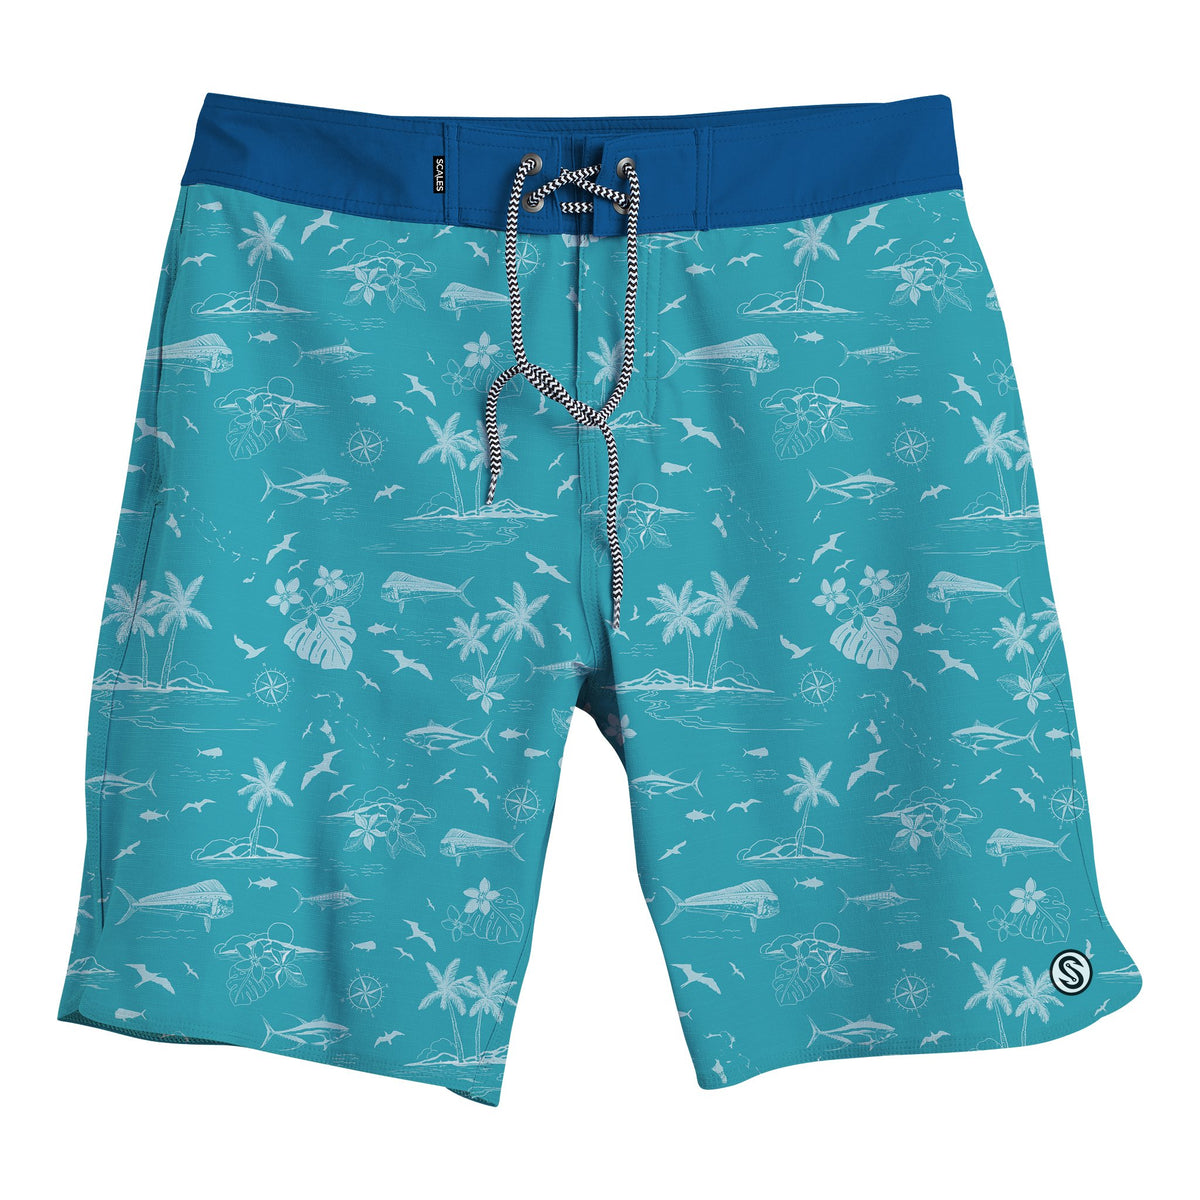 SCALES Never a Tourist First Mates Boardshorts